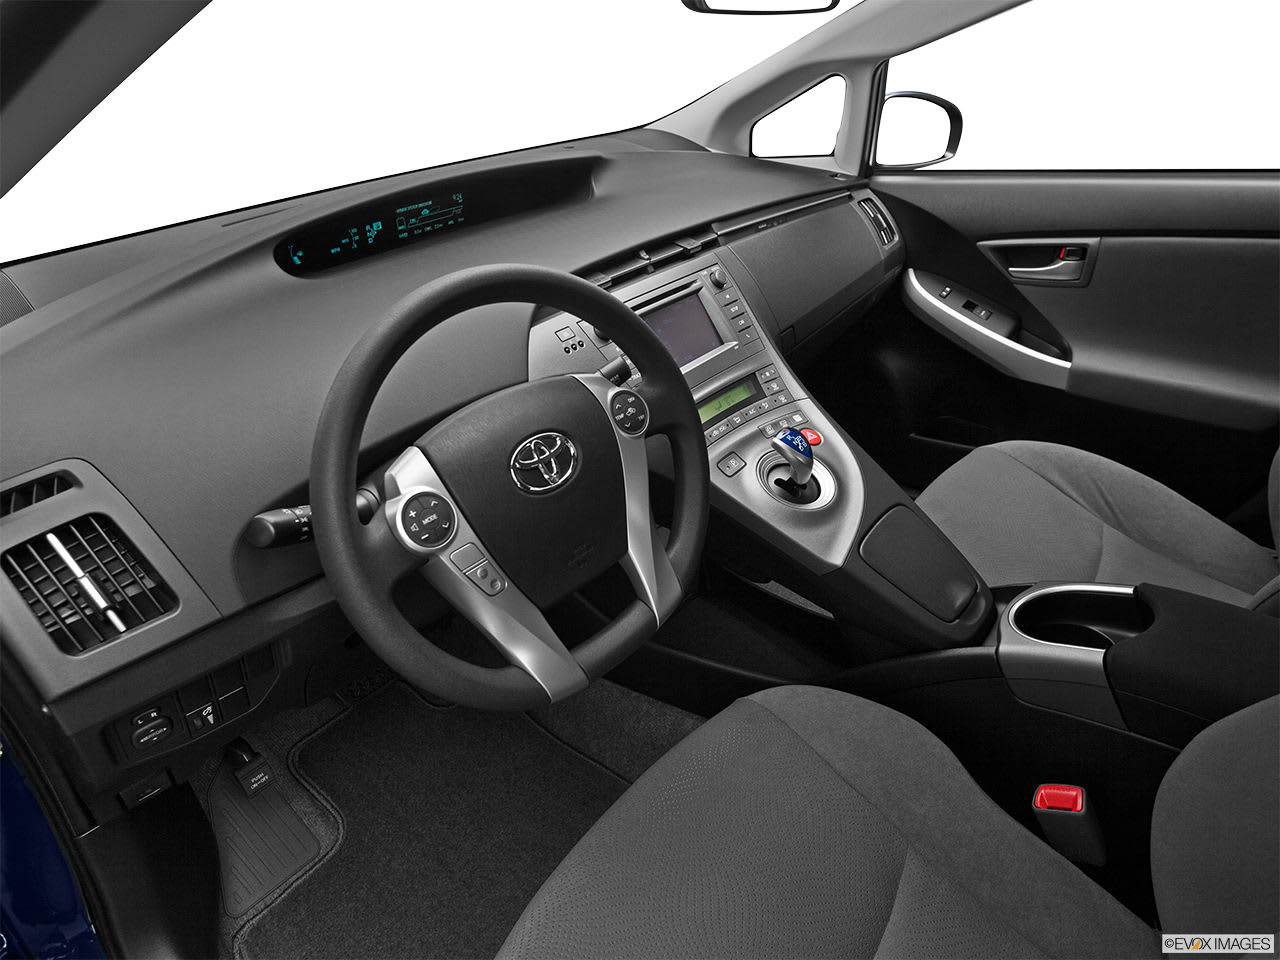 A Buyer's Guide to the 2012 Toyota Prius | YourMechanic Advice